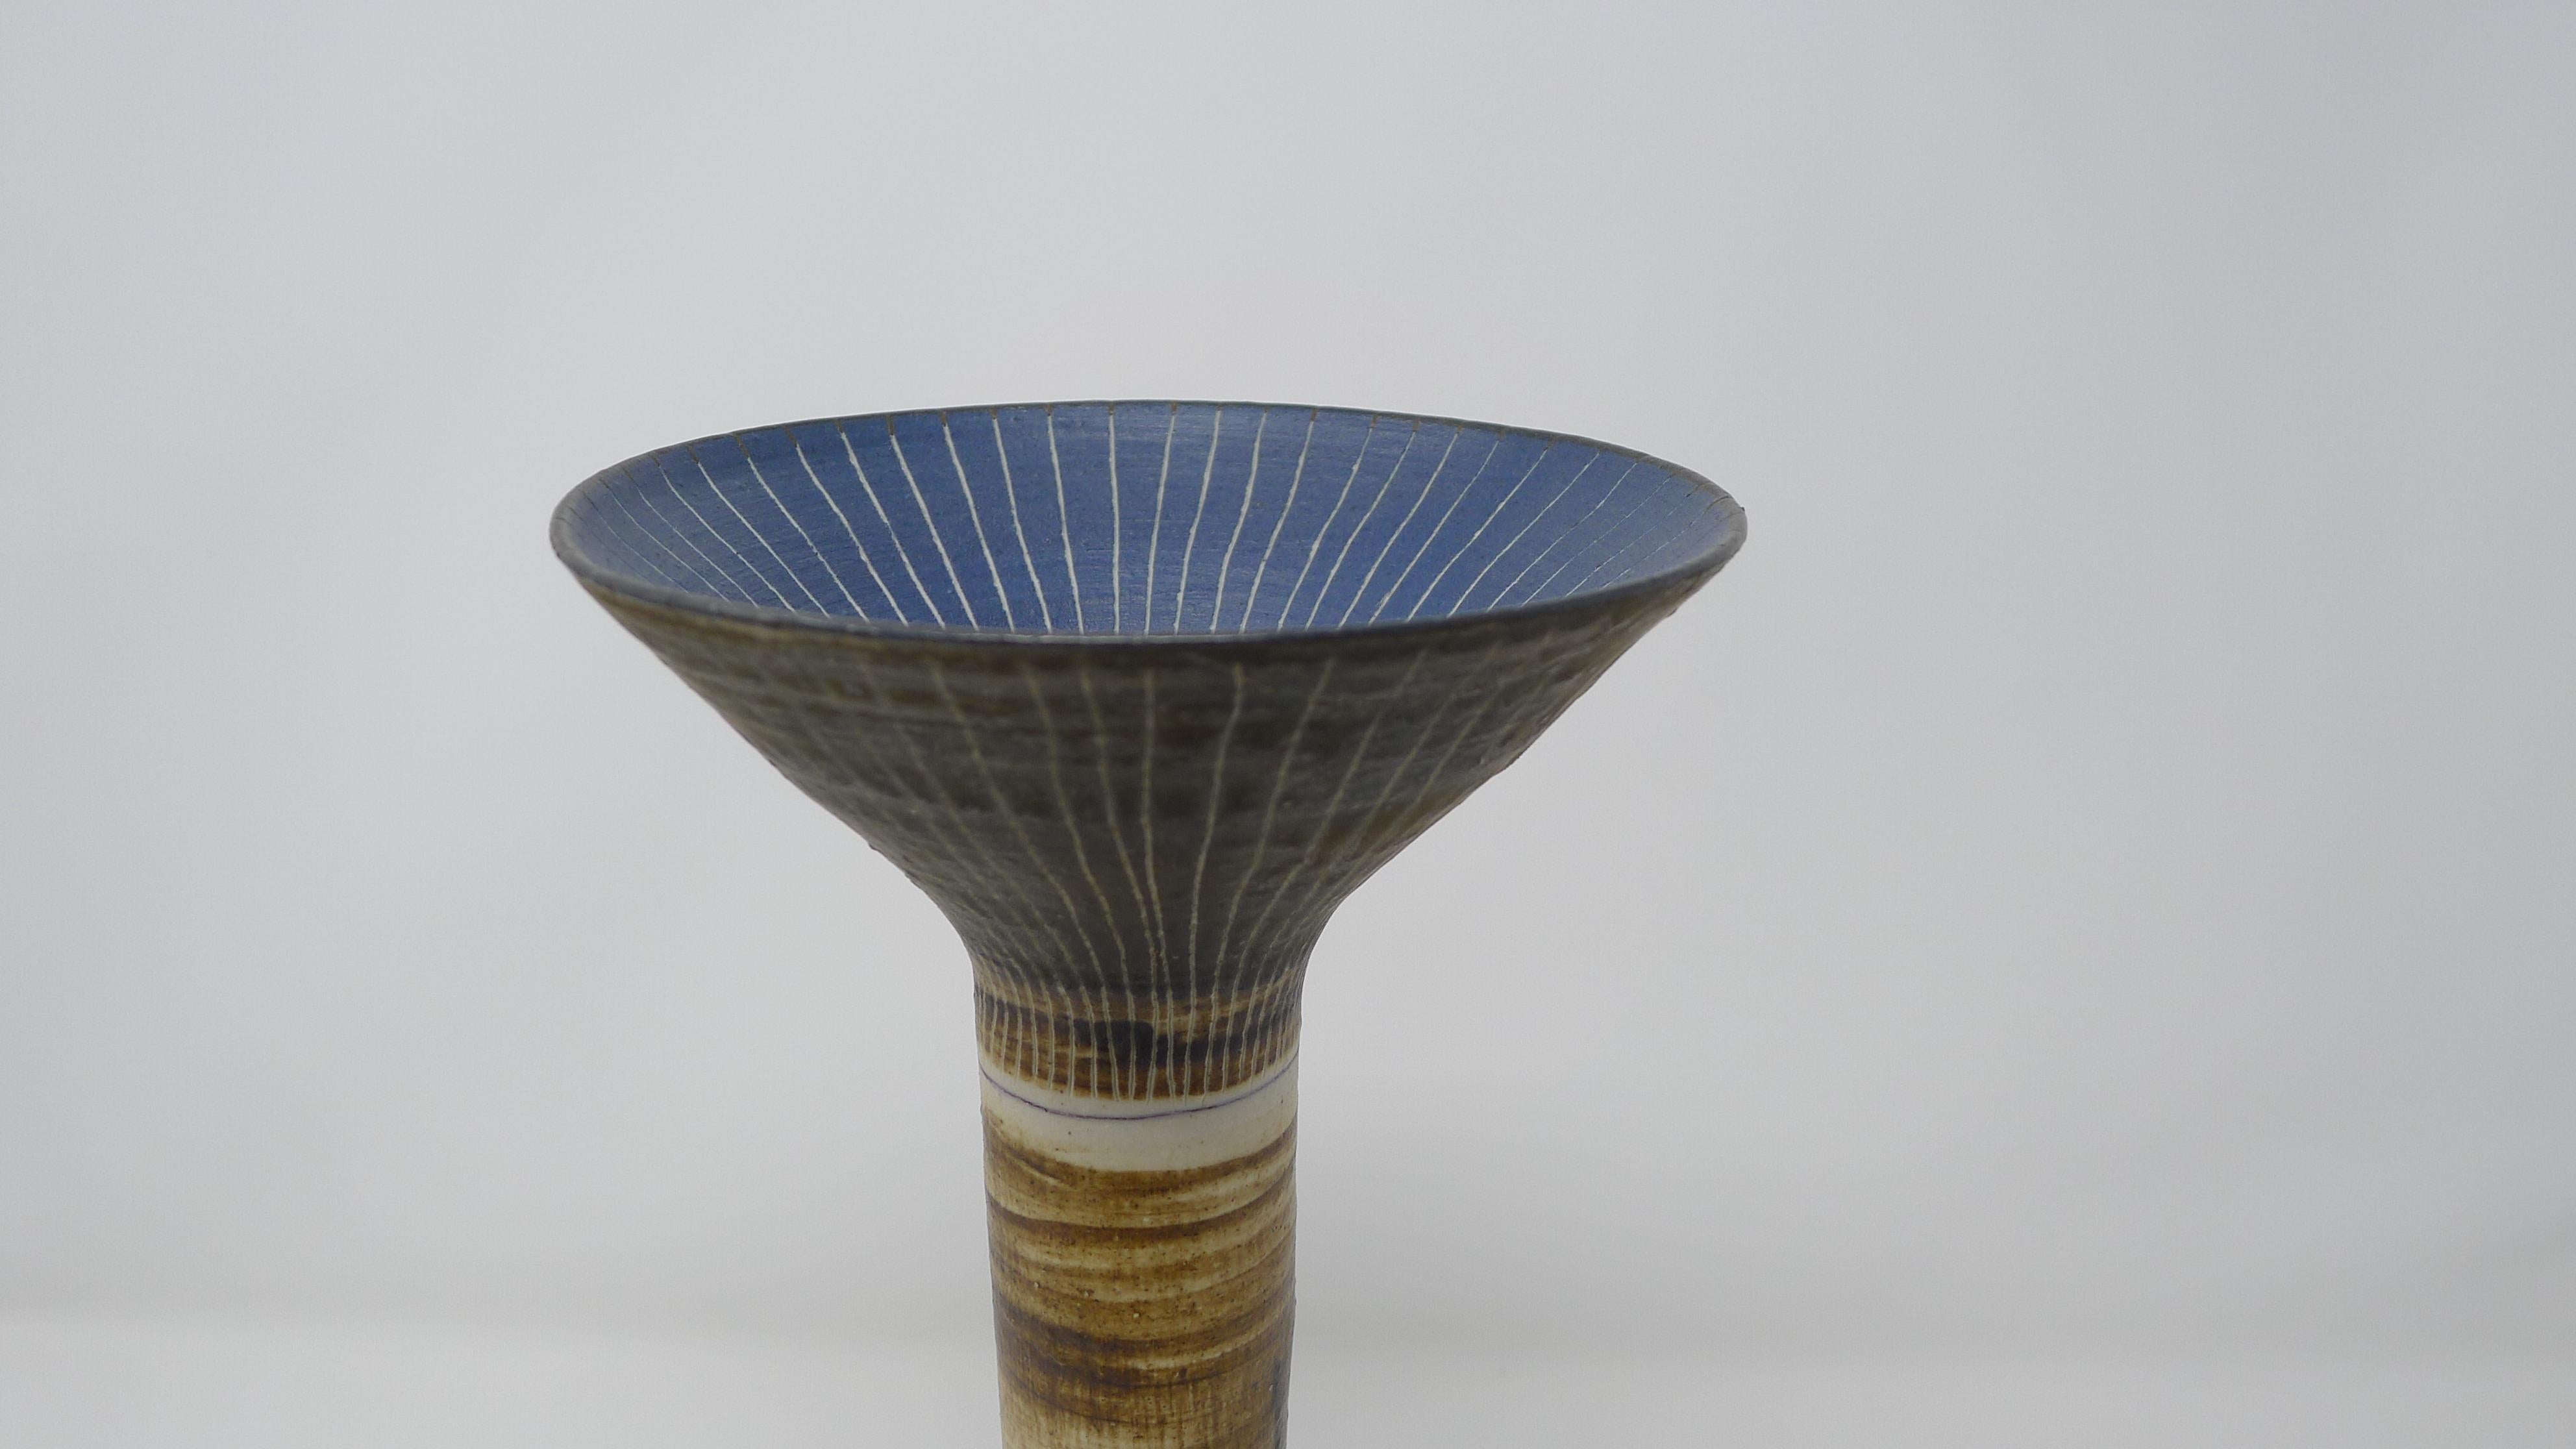 British Dame Lucie Rie, Tall Porcelain Vase, Signed and with Full Provenance